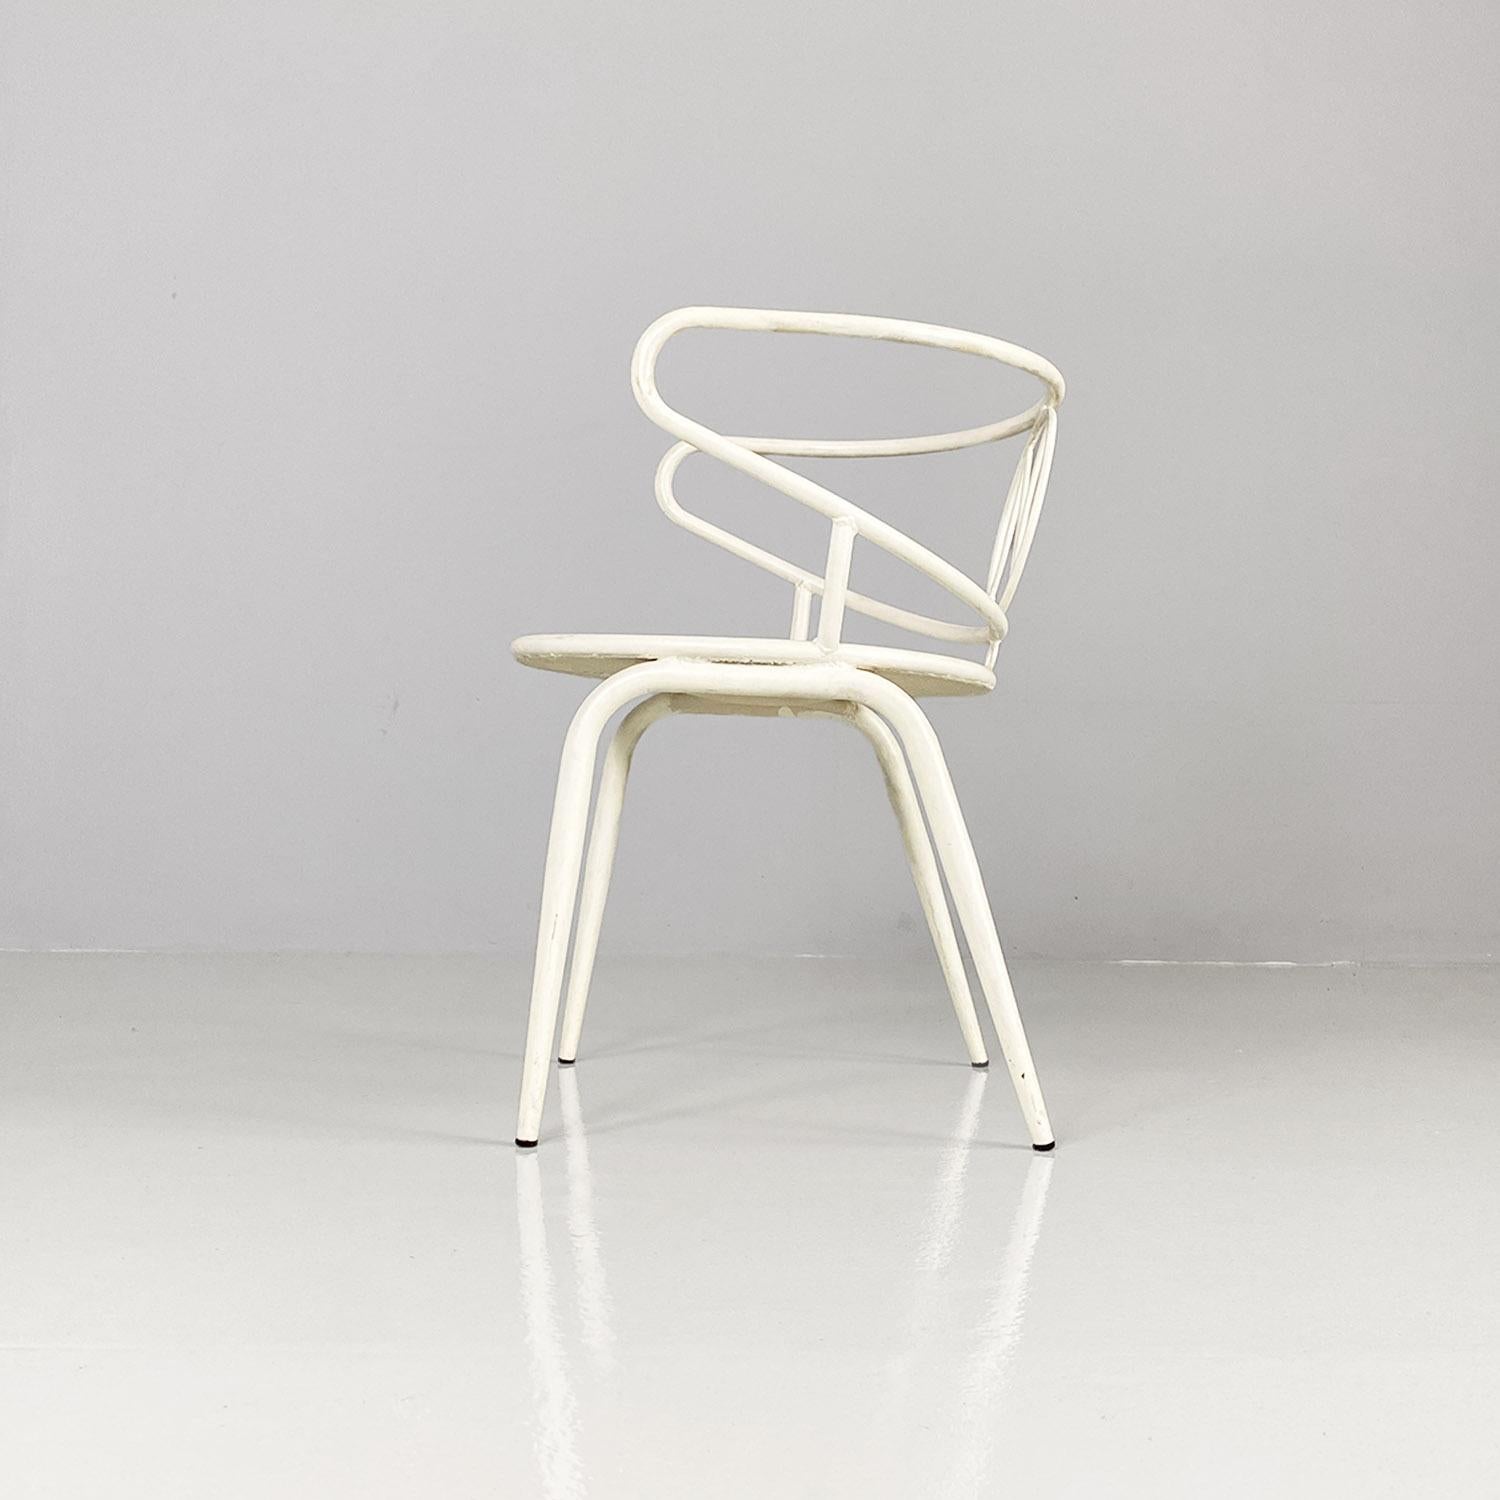 Italian mid century white metal outdoor chair with armrests, 1950s In Good Condition For Sale In MIlano, IT